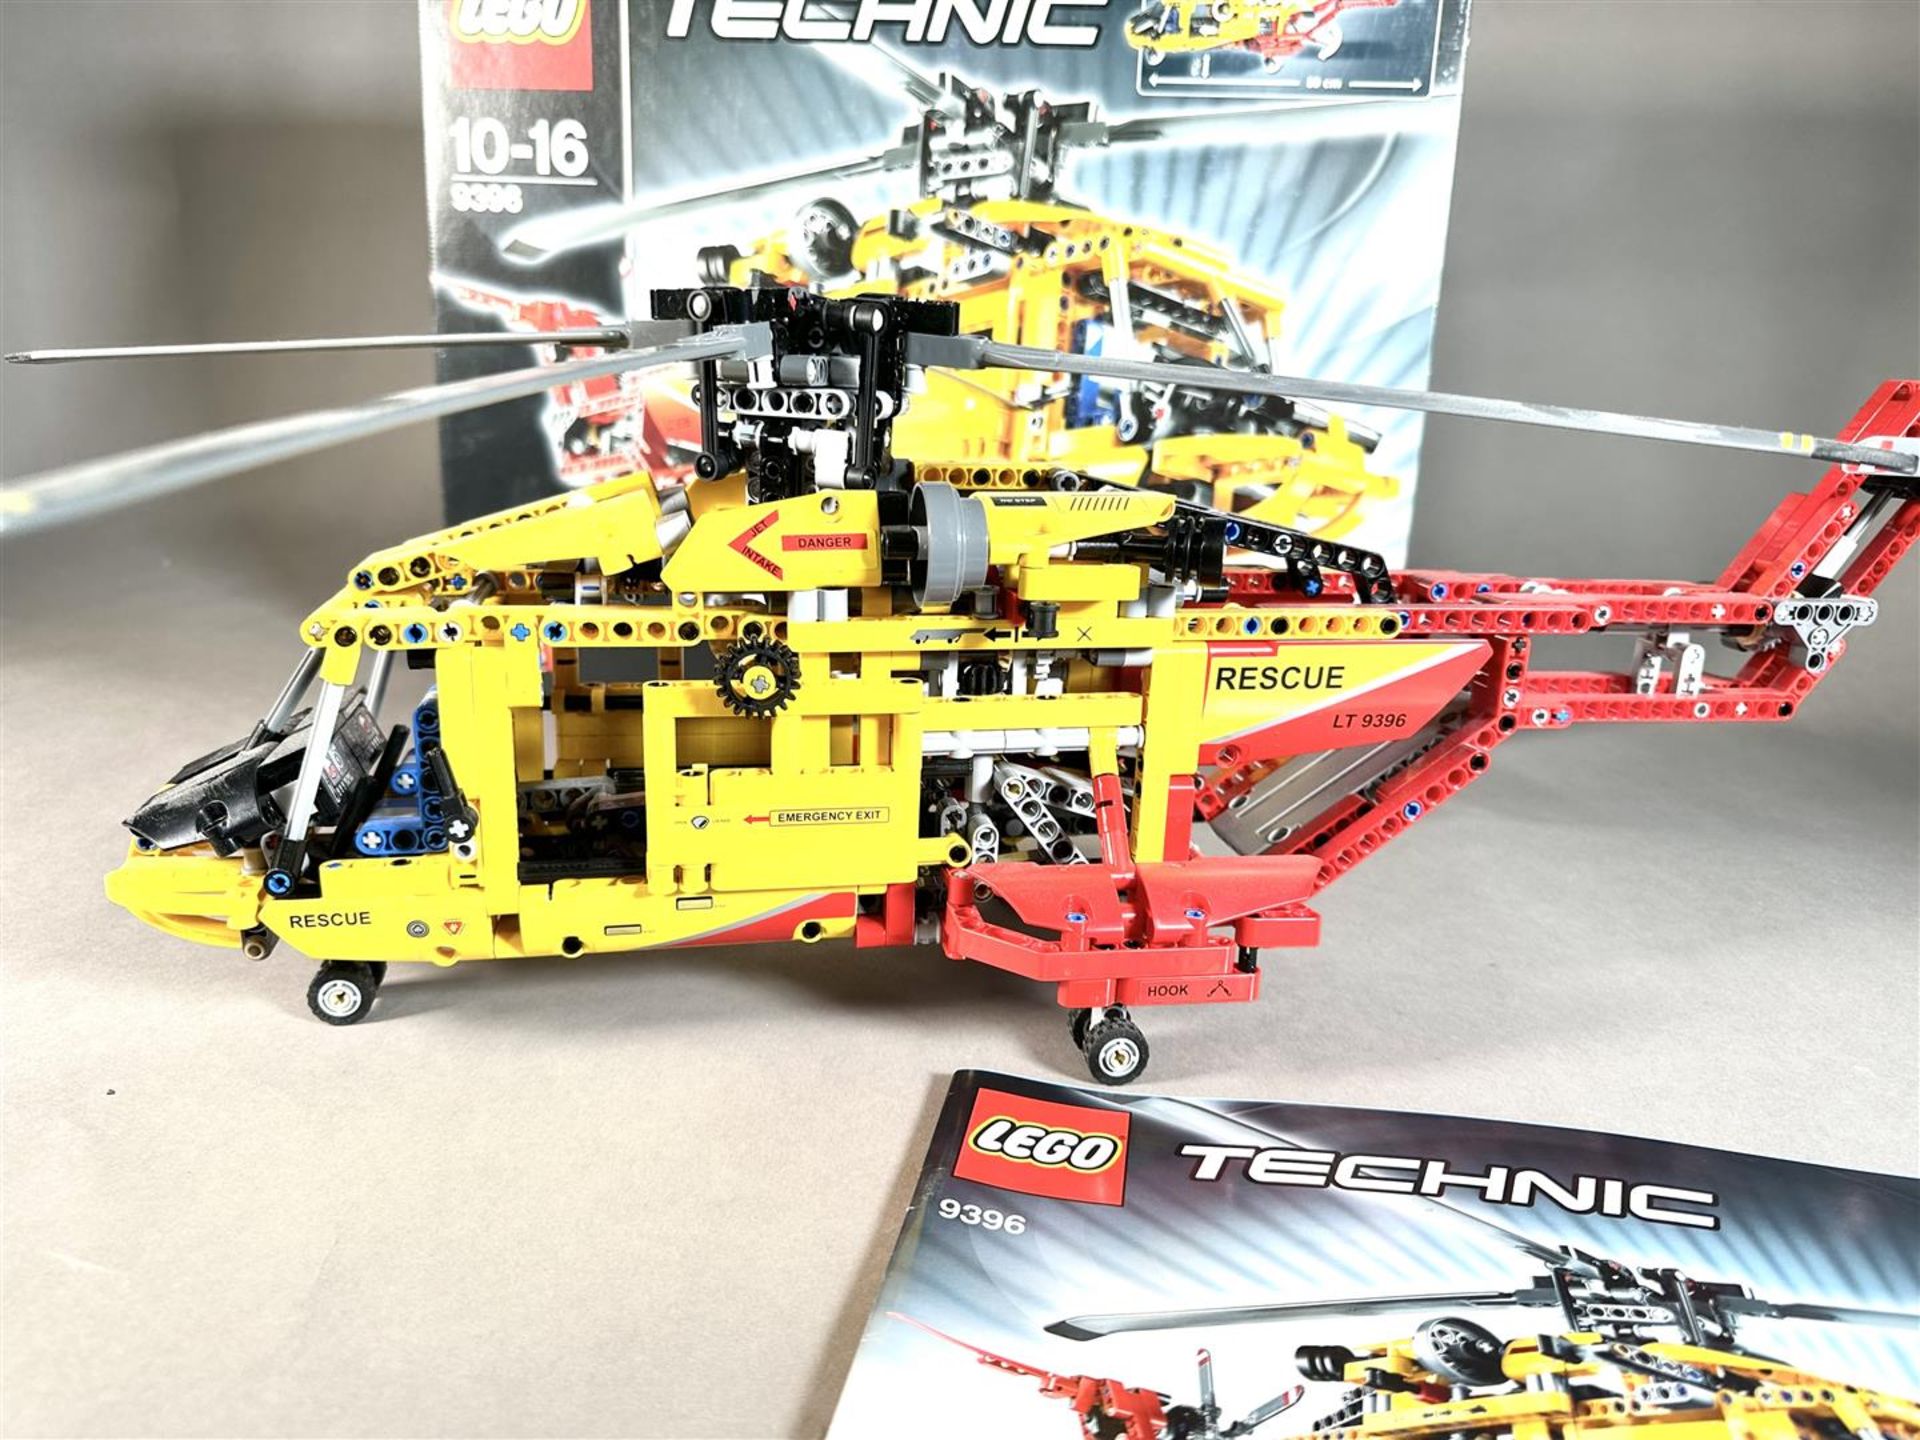 Lego - Technic - 9396 - Rescue Helicopter - Image 2 of 3